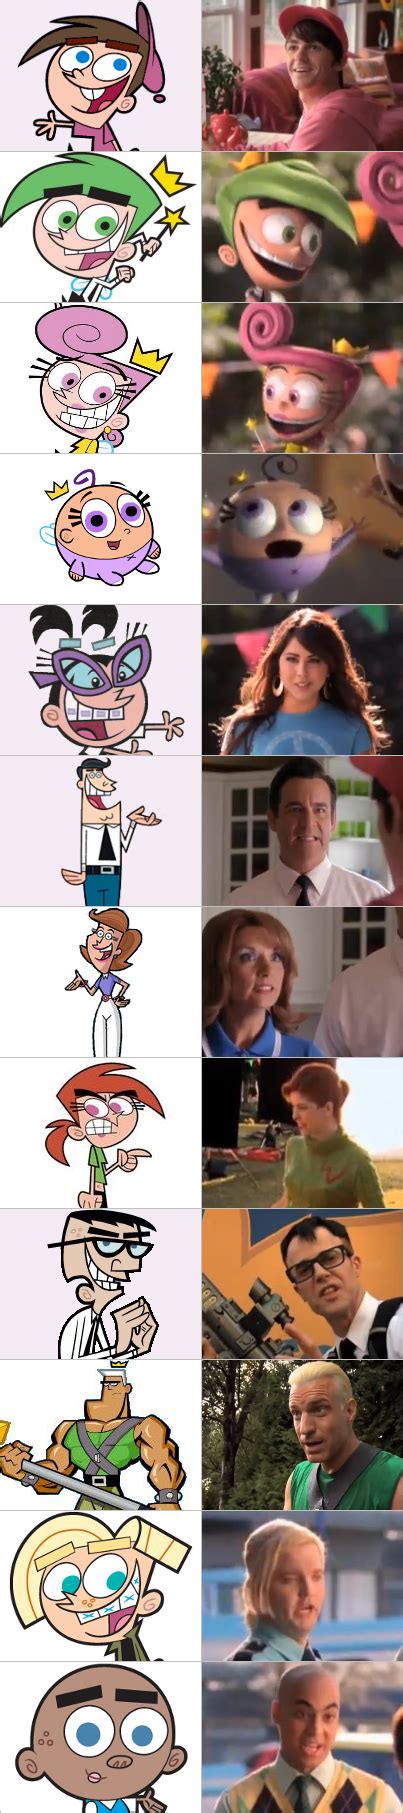 A Fairly Odd Movie Grow Up Timmy Turner The Fairly Oddparents Image